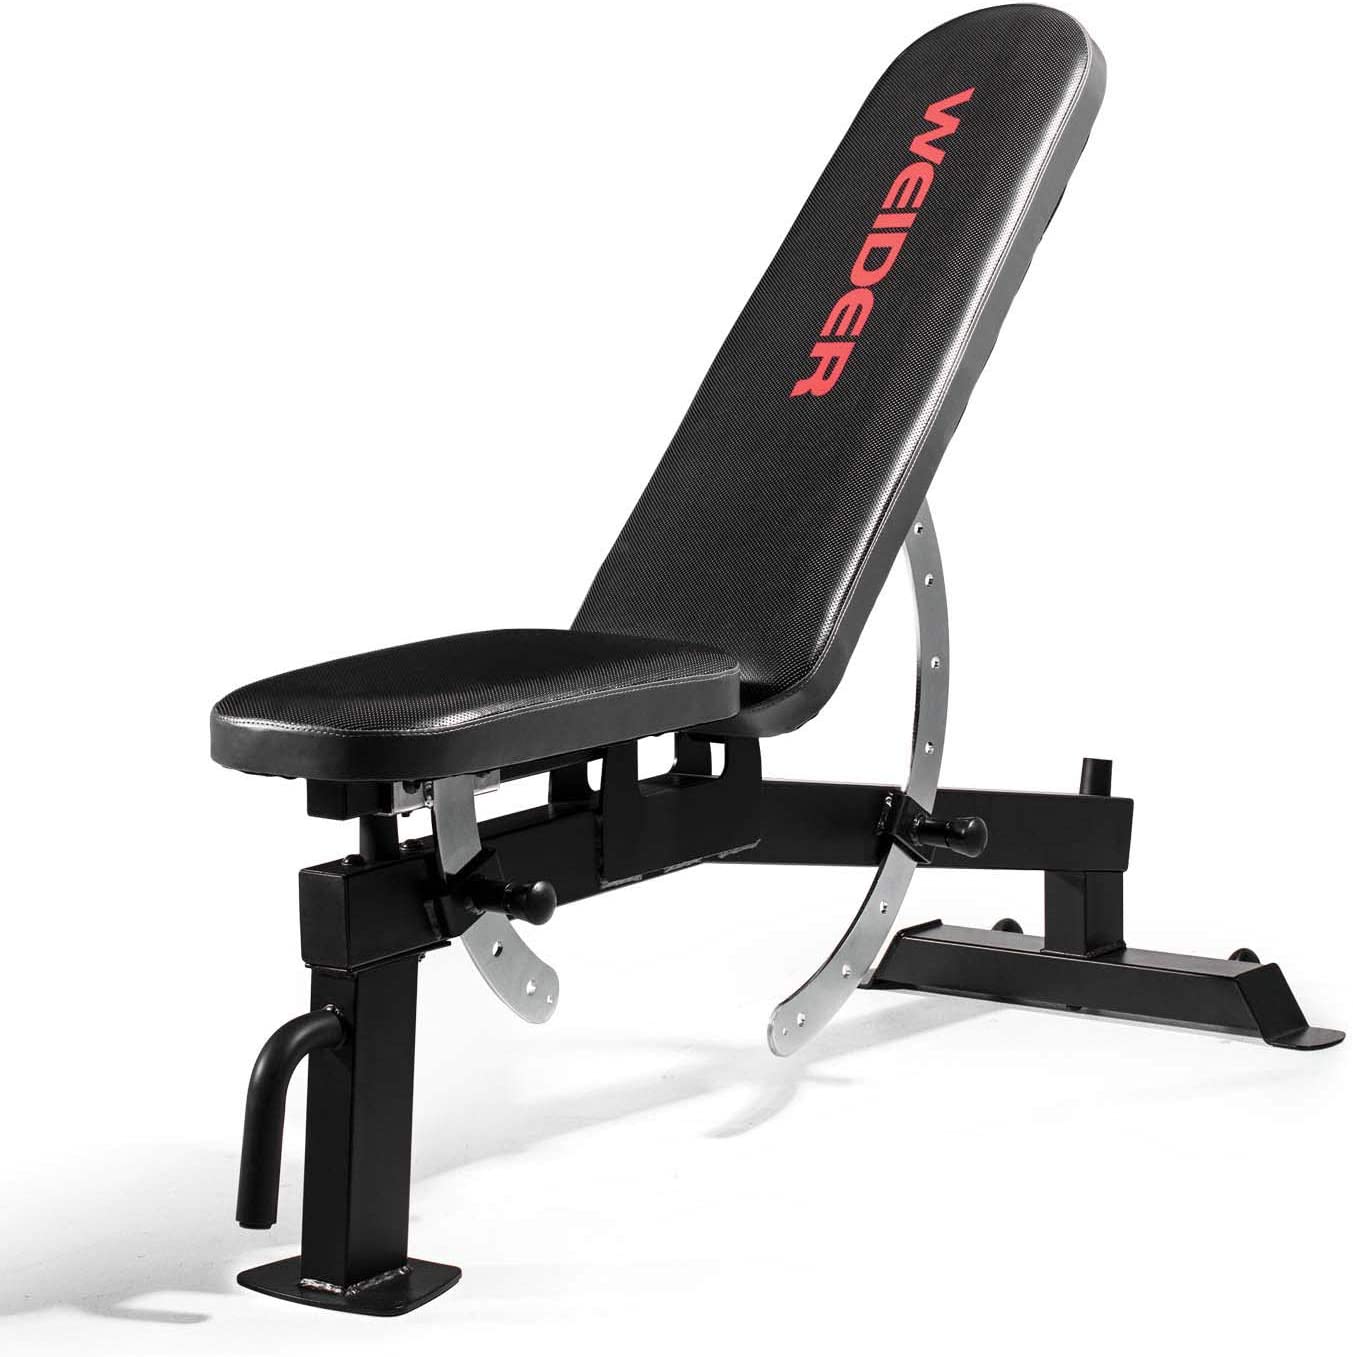 Marcy GS99 Dual Stack Home Corner Multi Gym